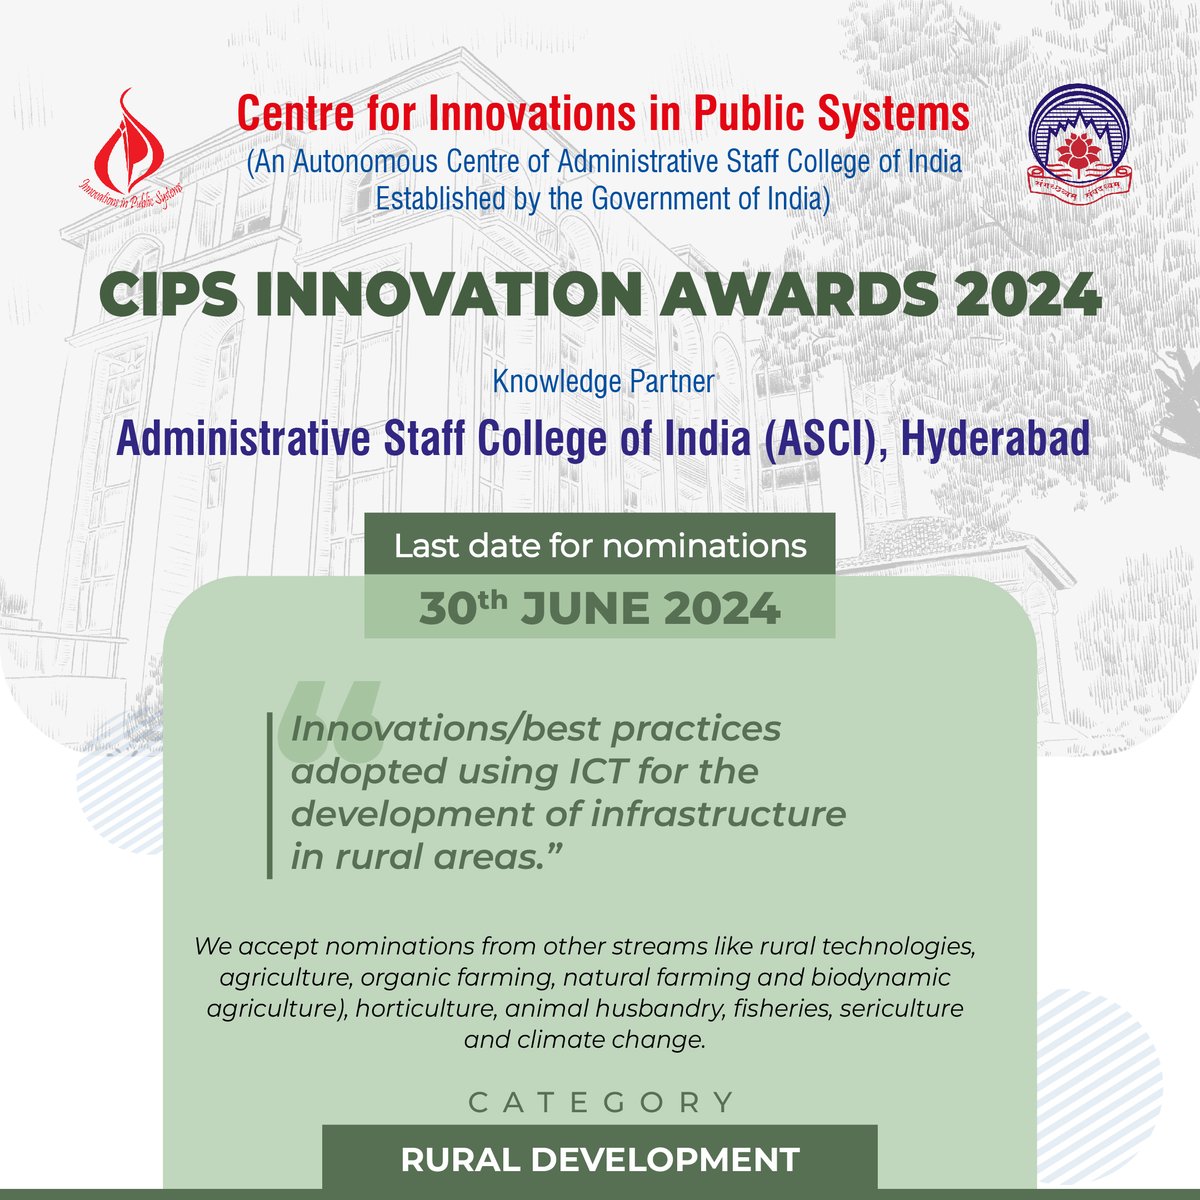 @CIPShyd seeks nominations in Education, Environment, Health, IT, Rural Development and Surveillance! From International bordering districts, UTs, Northeast & Hill States. Nominations close on June 30th, 2024! Don't miss out! cips.org.in @ASCIMEDIA @RameshPV2010